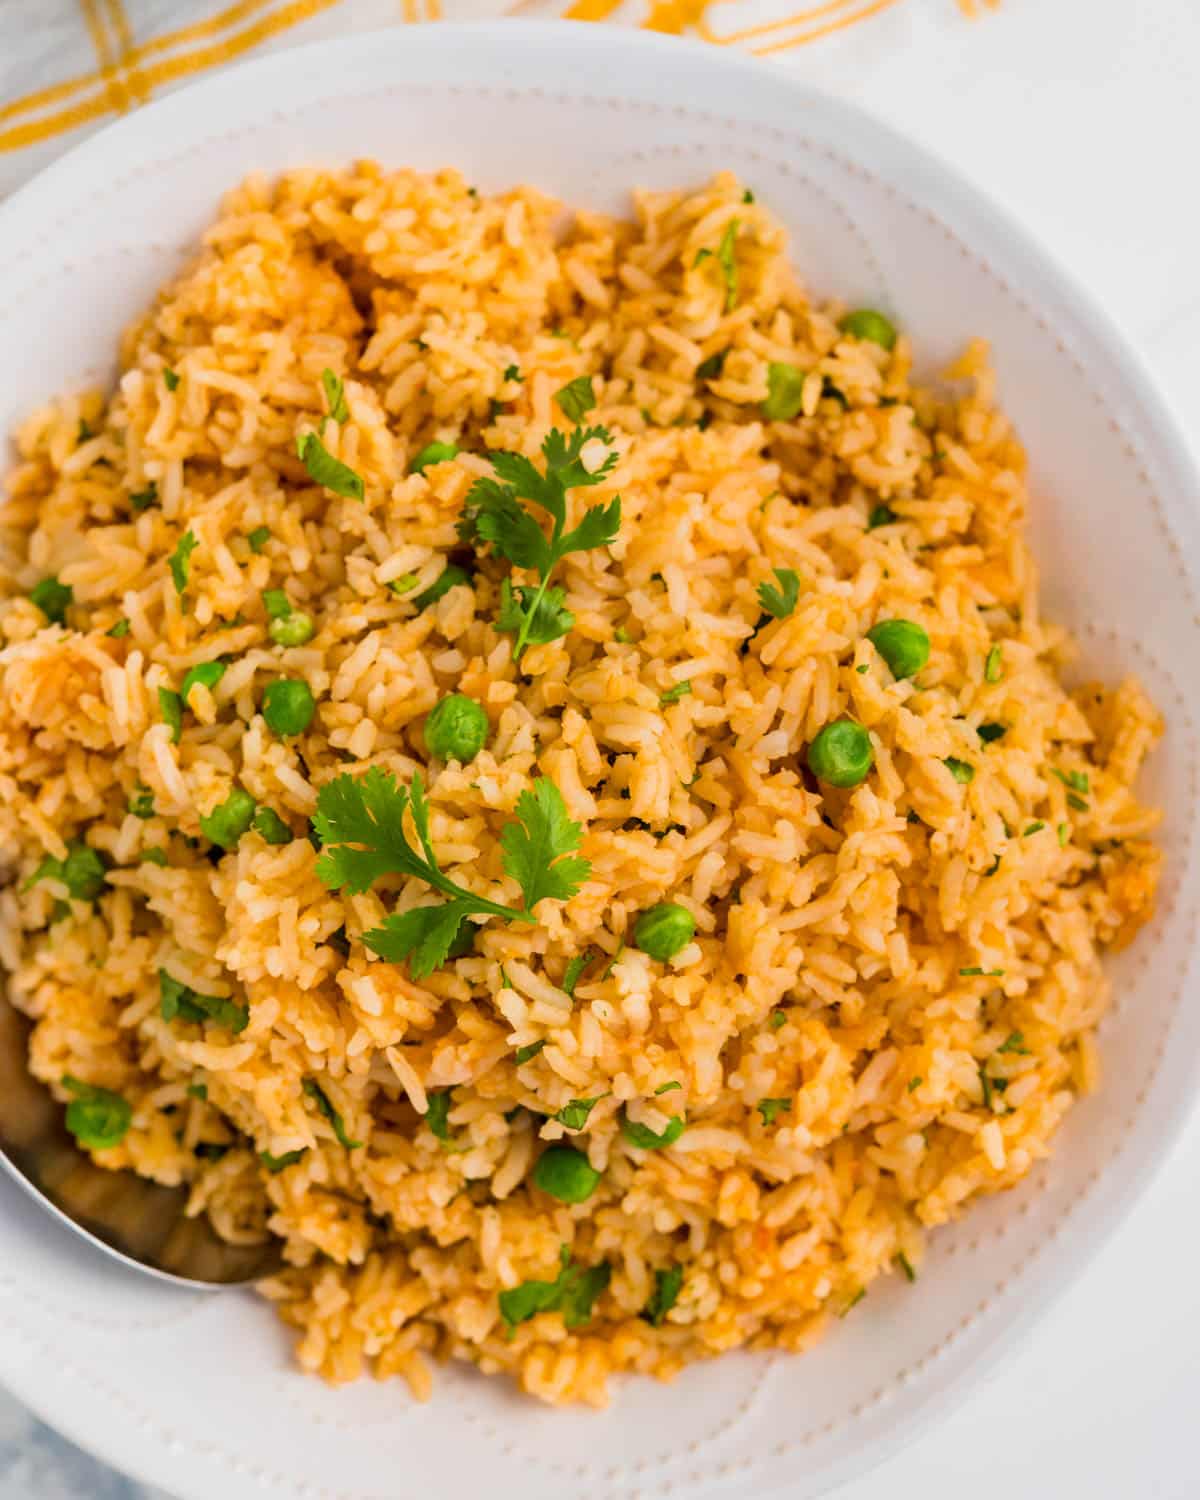 A white bowl filled with arroz roja, cilantro and peas as a side dish.